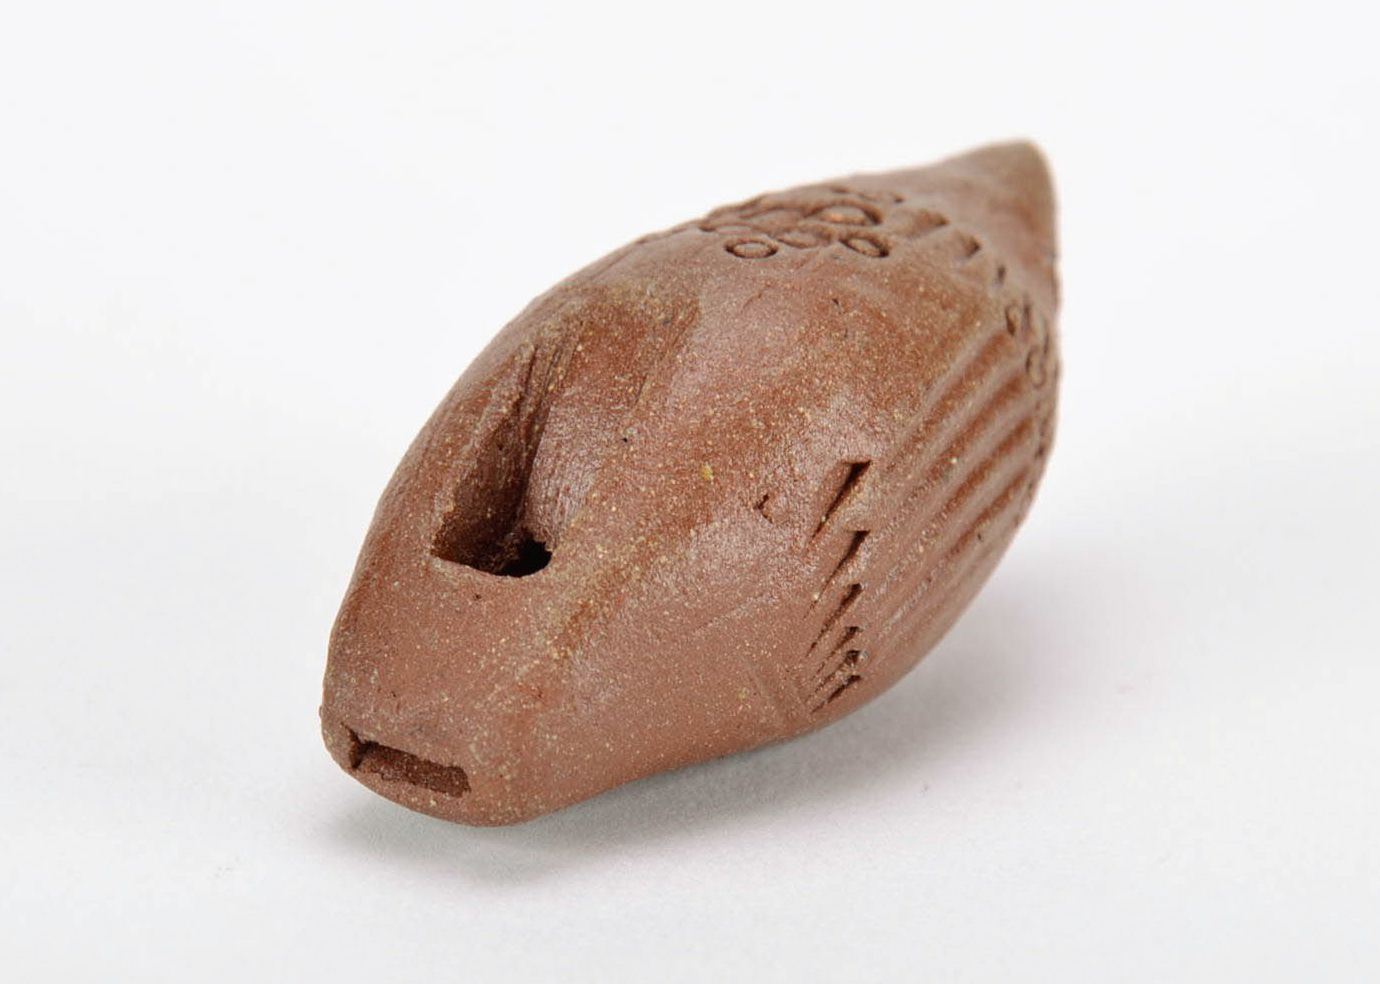 Clay penny whistle Fish photo 2